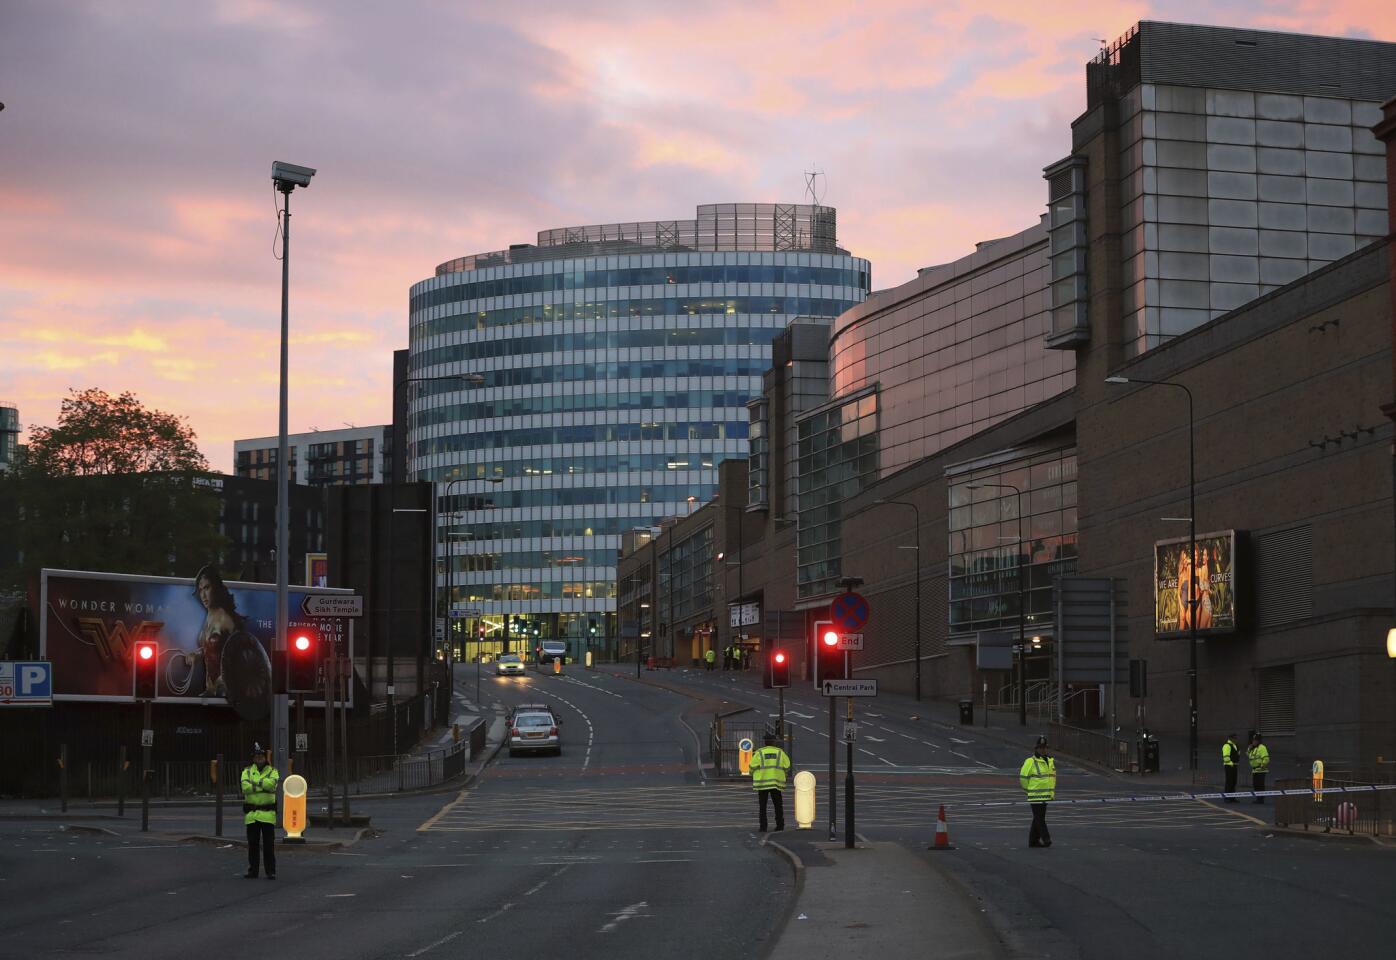 Police stand guard at dawn, after a blast at the Manchester Arena on May 23, 2017.